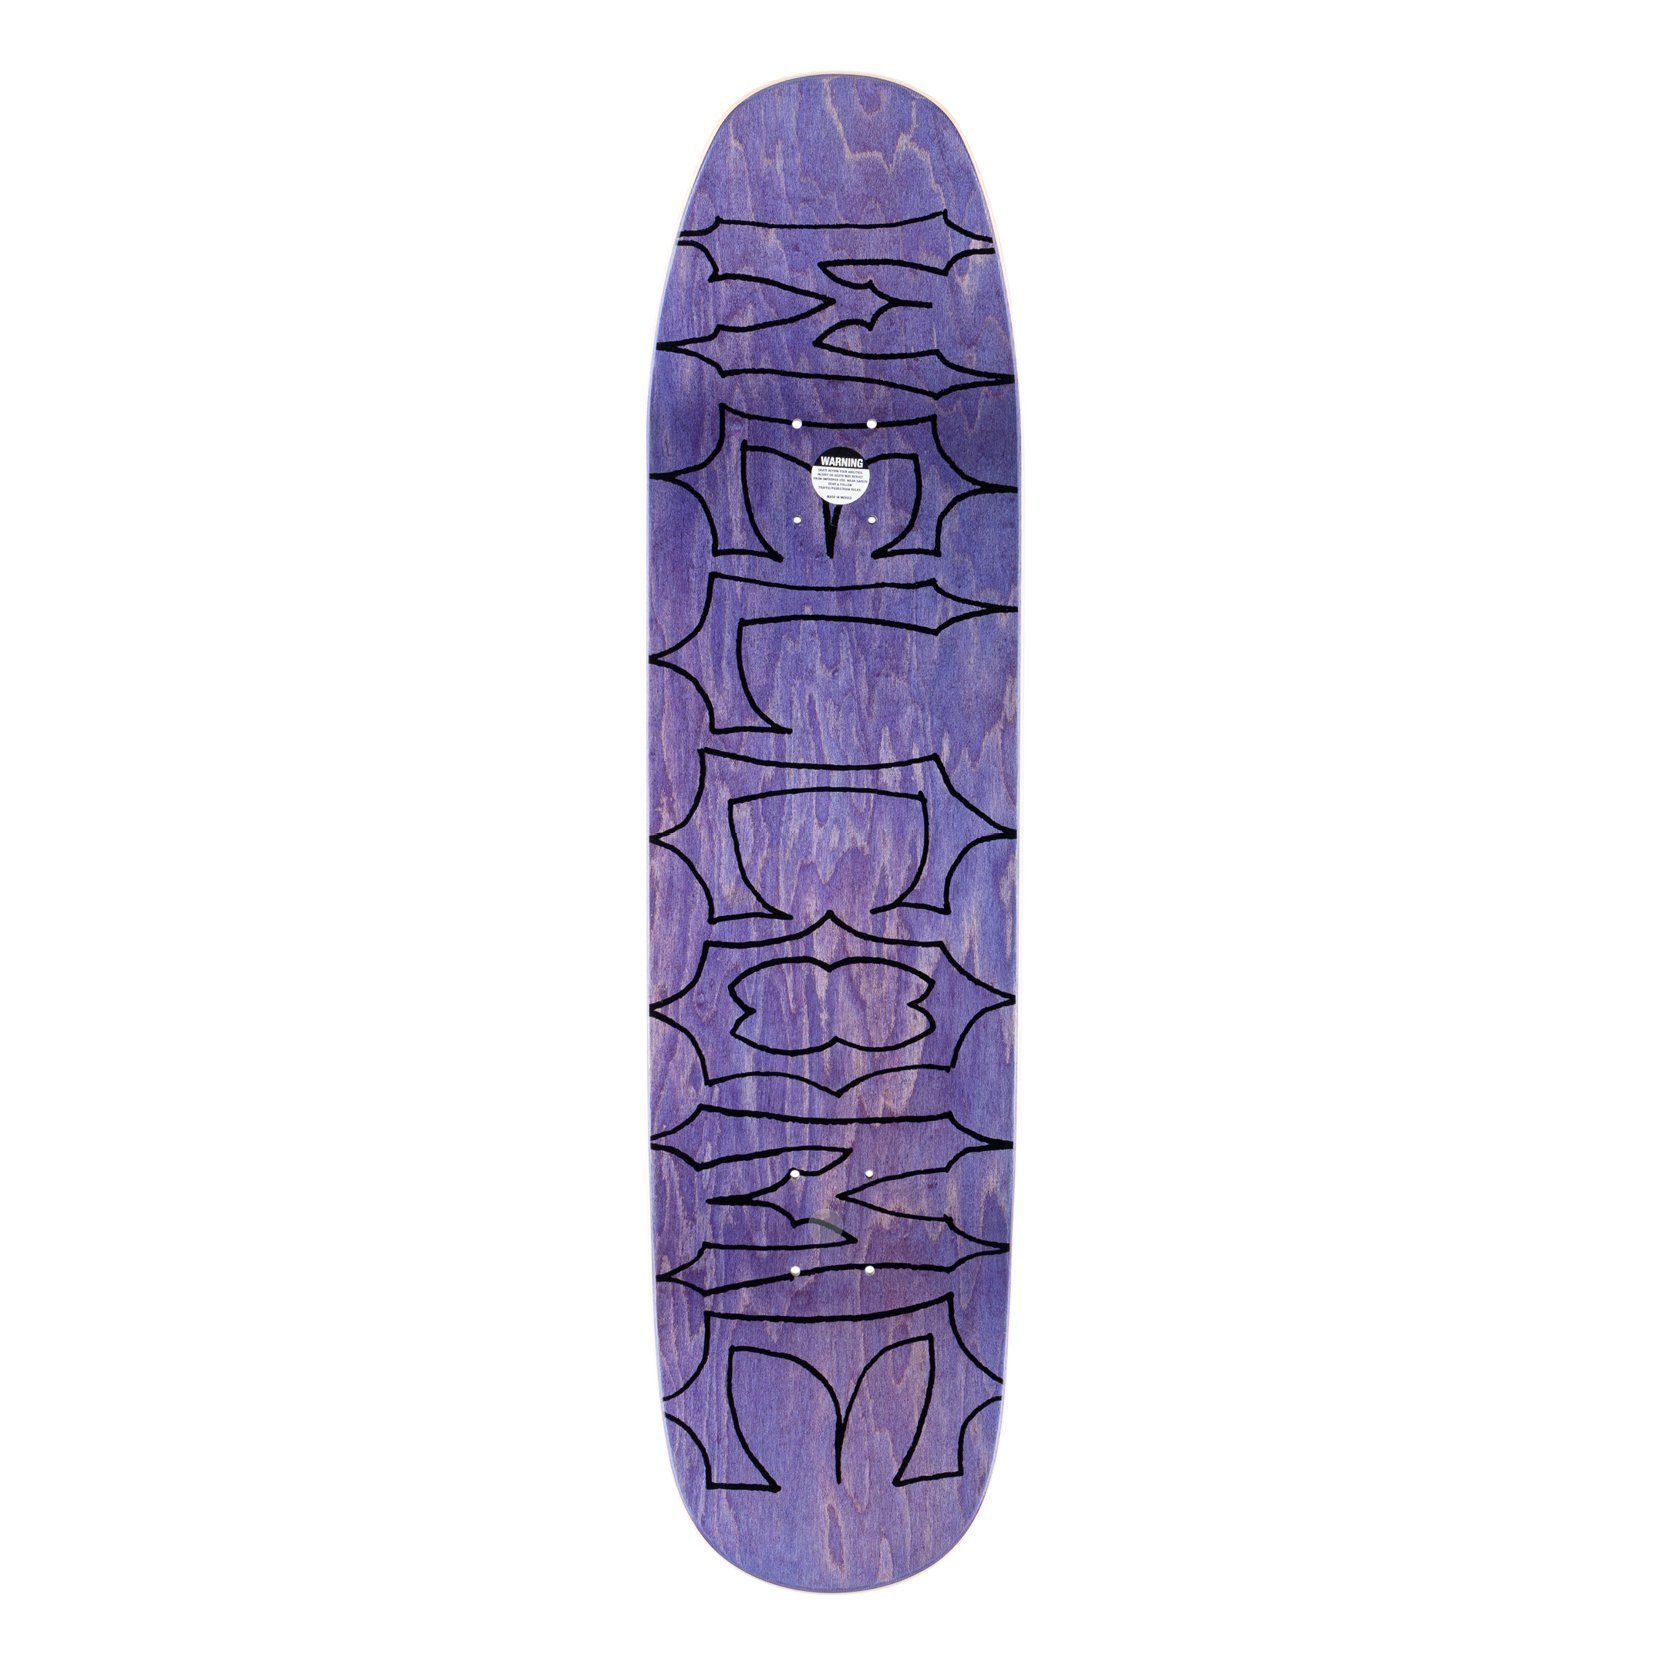 WELCOME DECK BIRD BRAIN ON SON OF MOONTRIMMER (8.25") - The Drive Skateshop